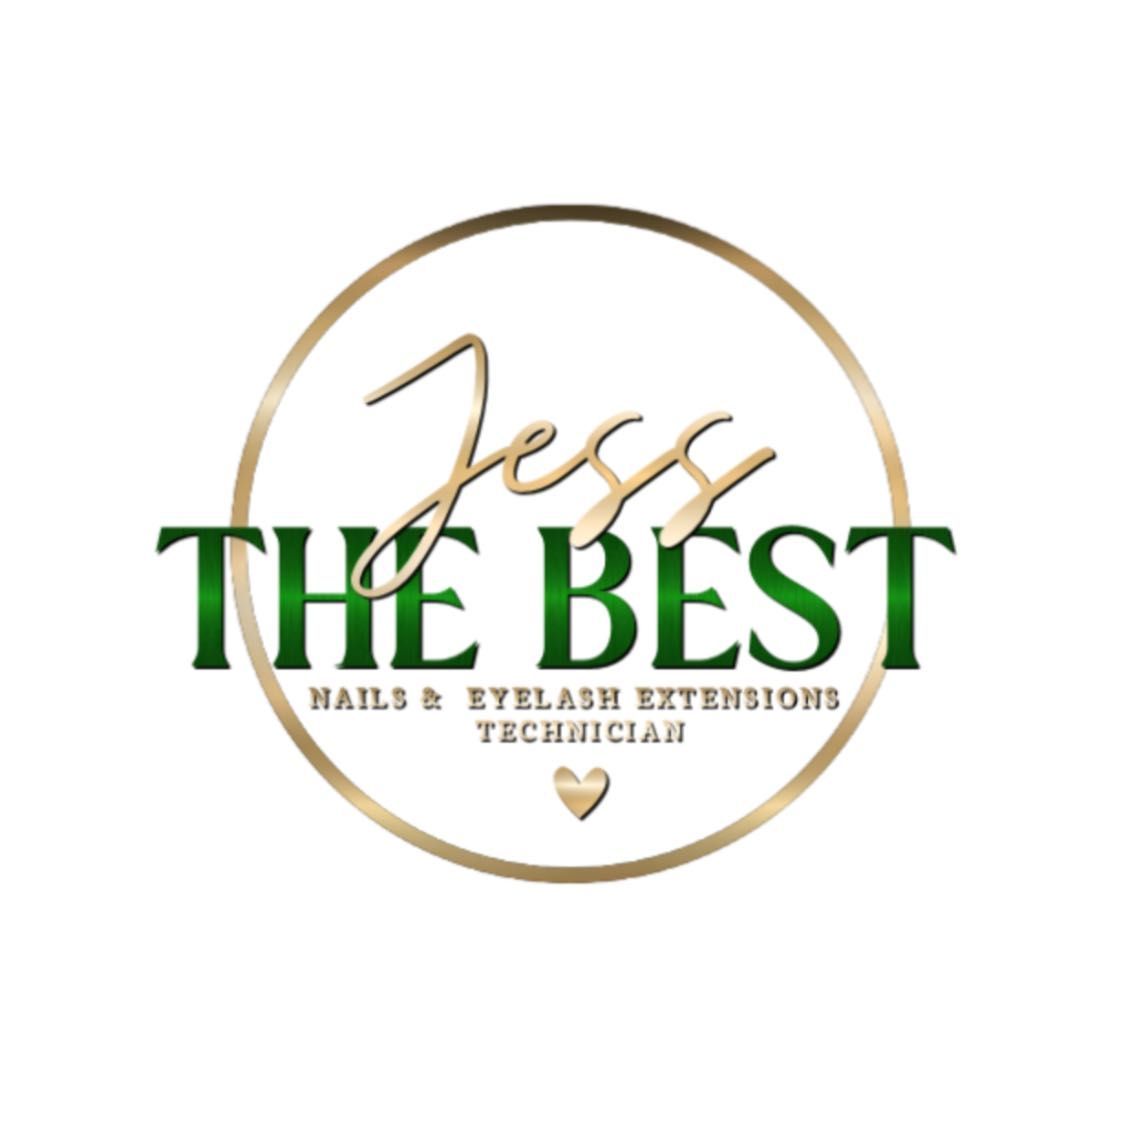 Jess The Best, 3276 N John Young Pkwy, #133, Kissimmee, 34741